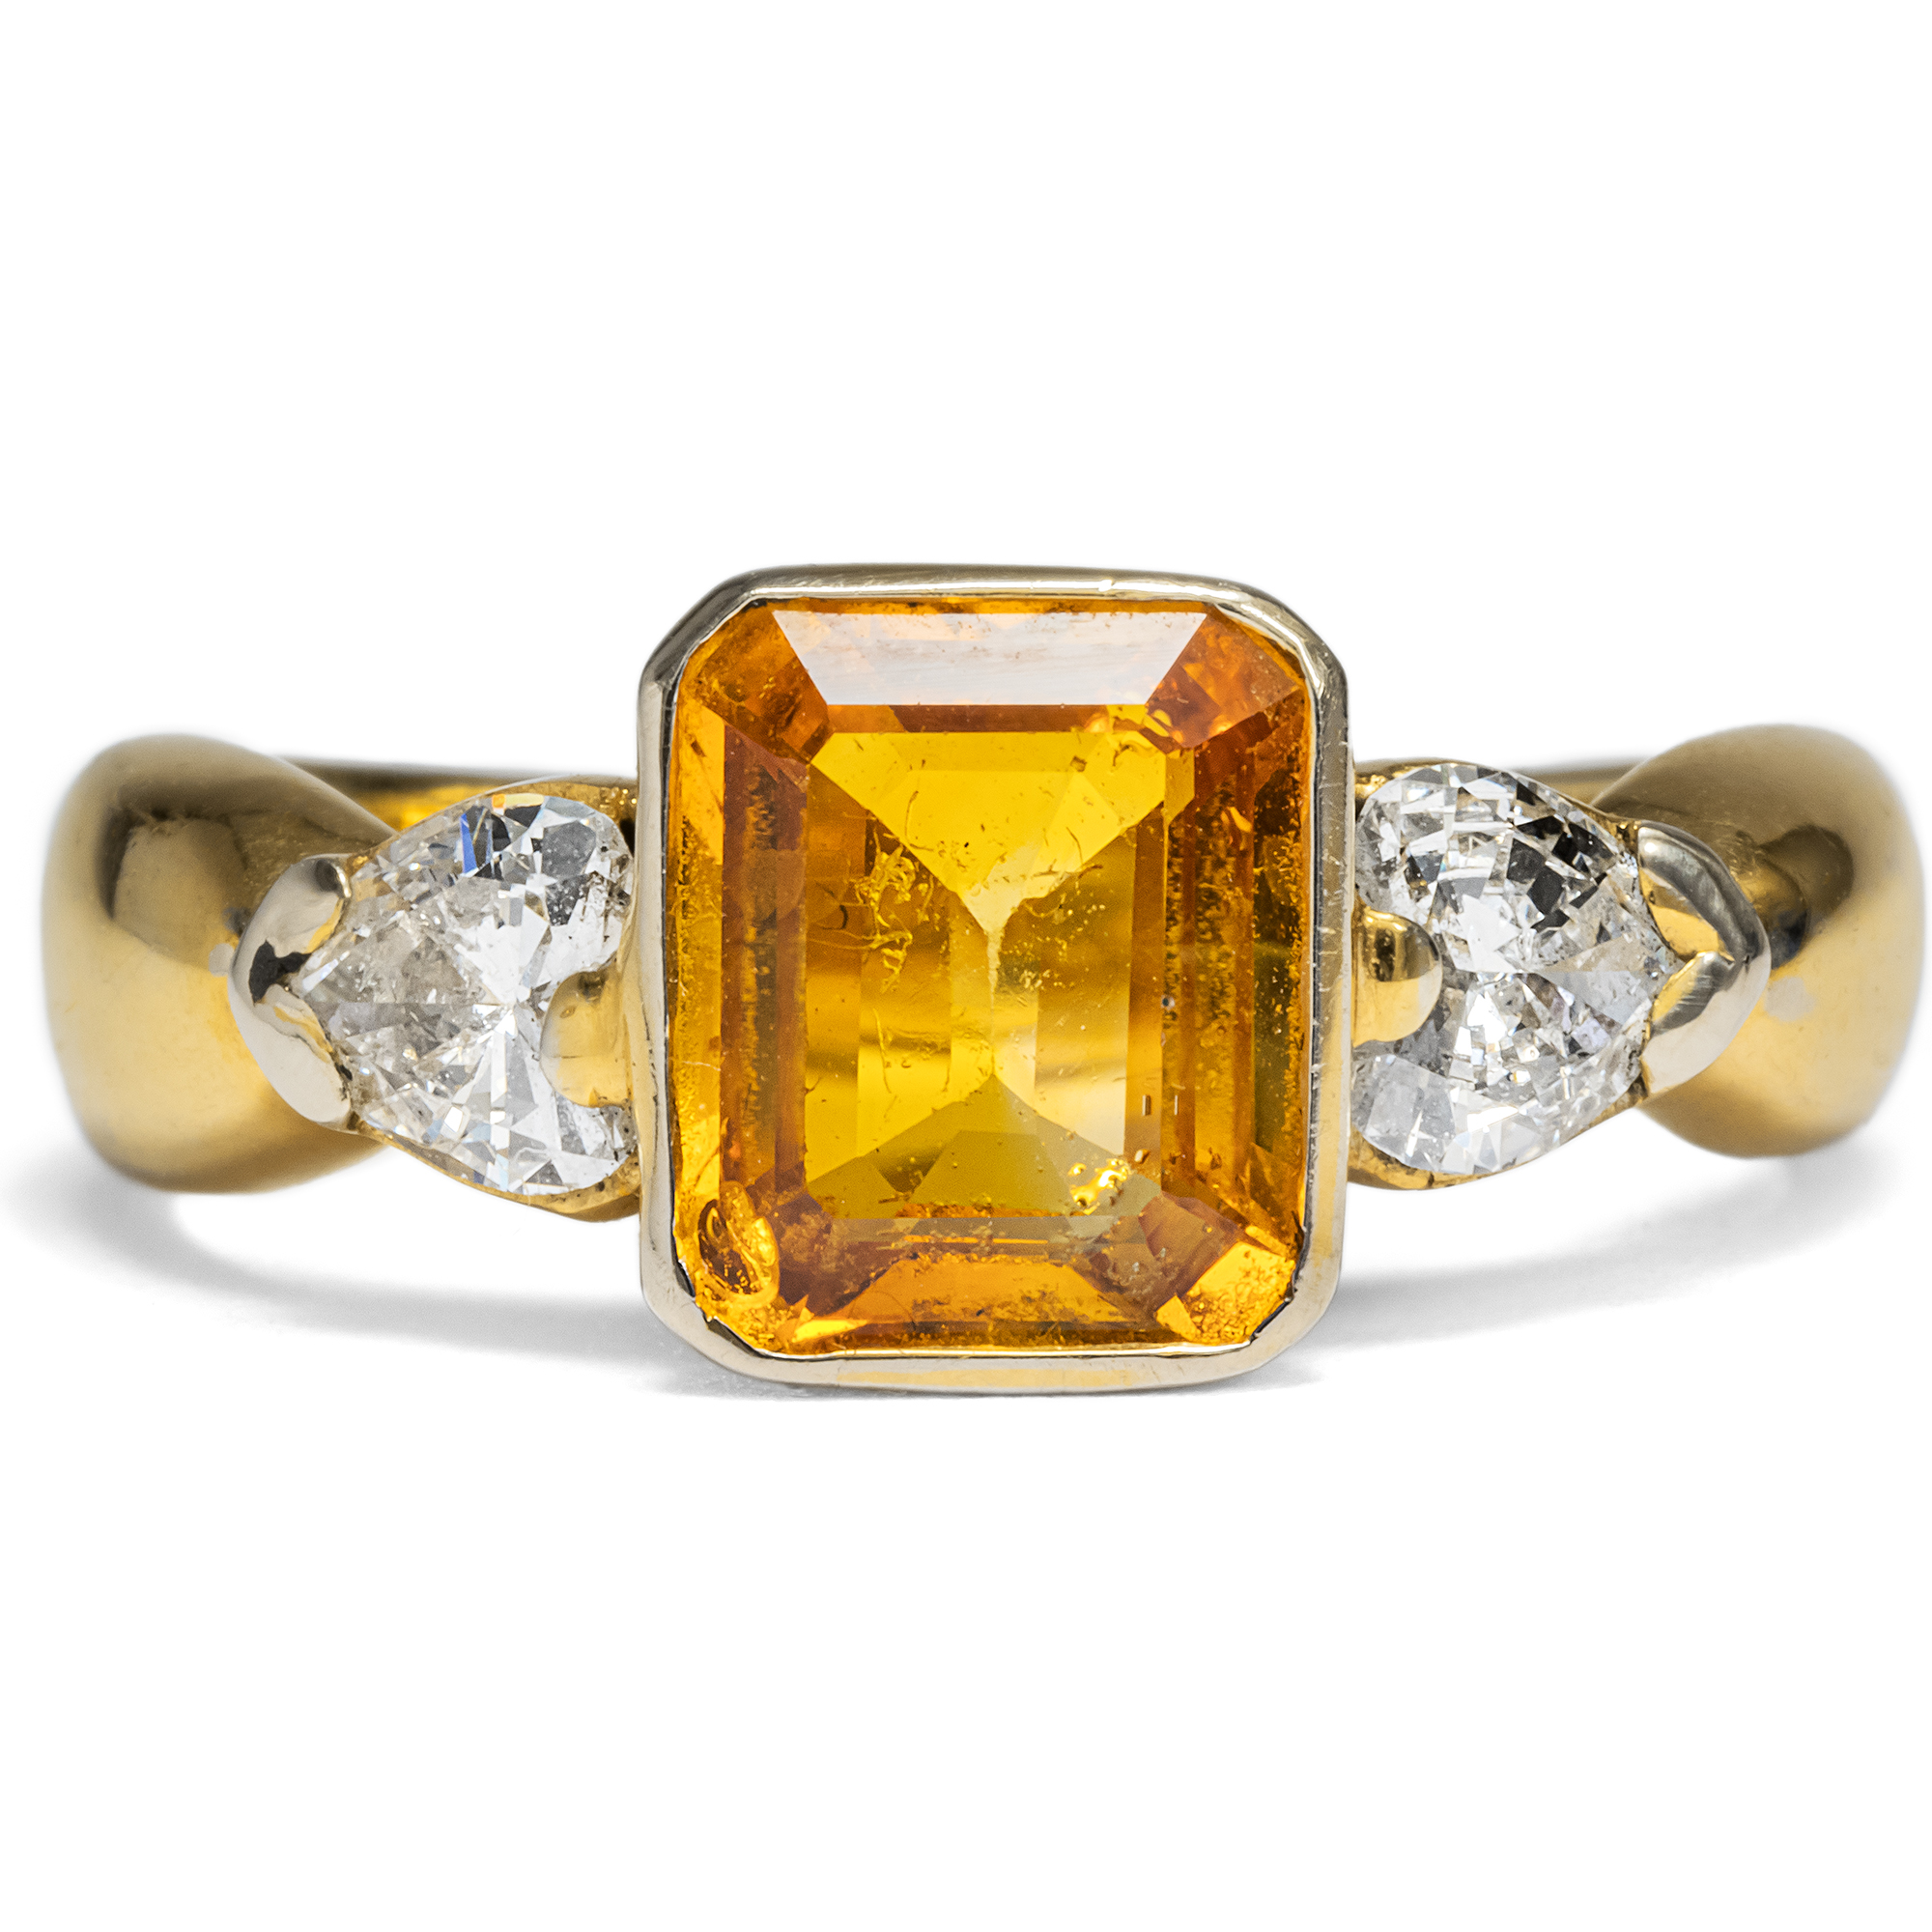 Vintage Ring with Orange Sapphire & Diamonds in Gold, Italy ca. 2010